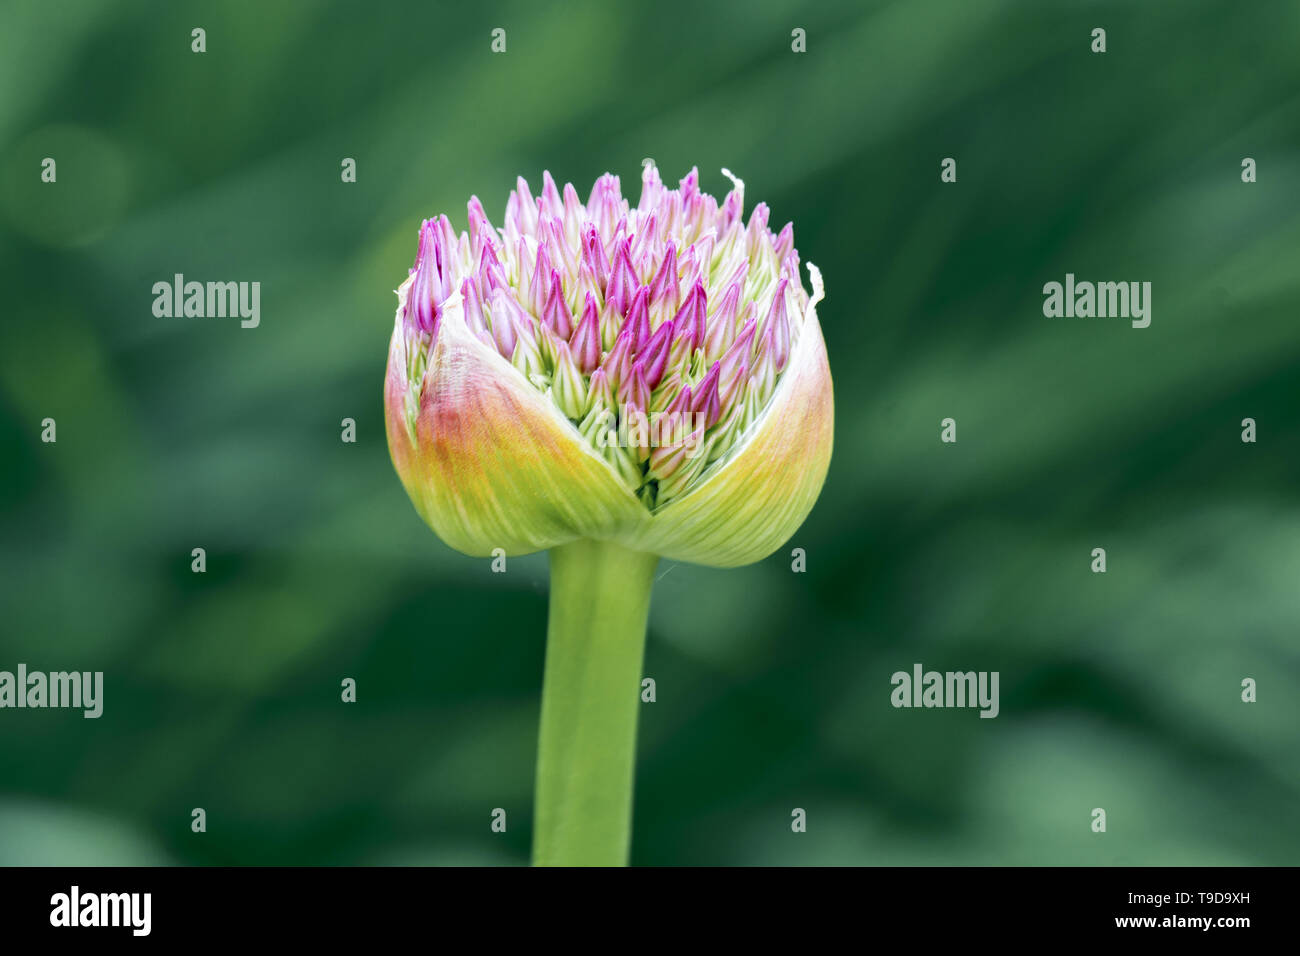 Macro close up of an isolated pink ornamental onion allium flower bud showing many details Stock Photo